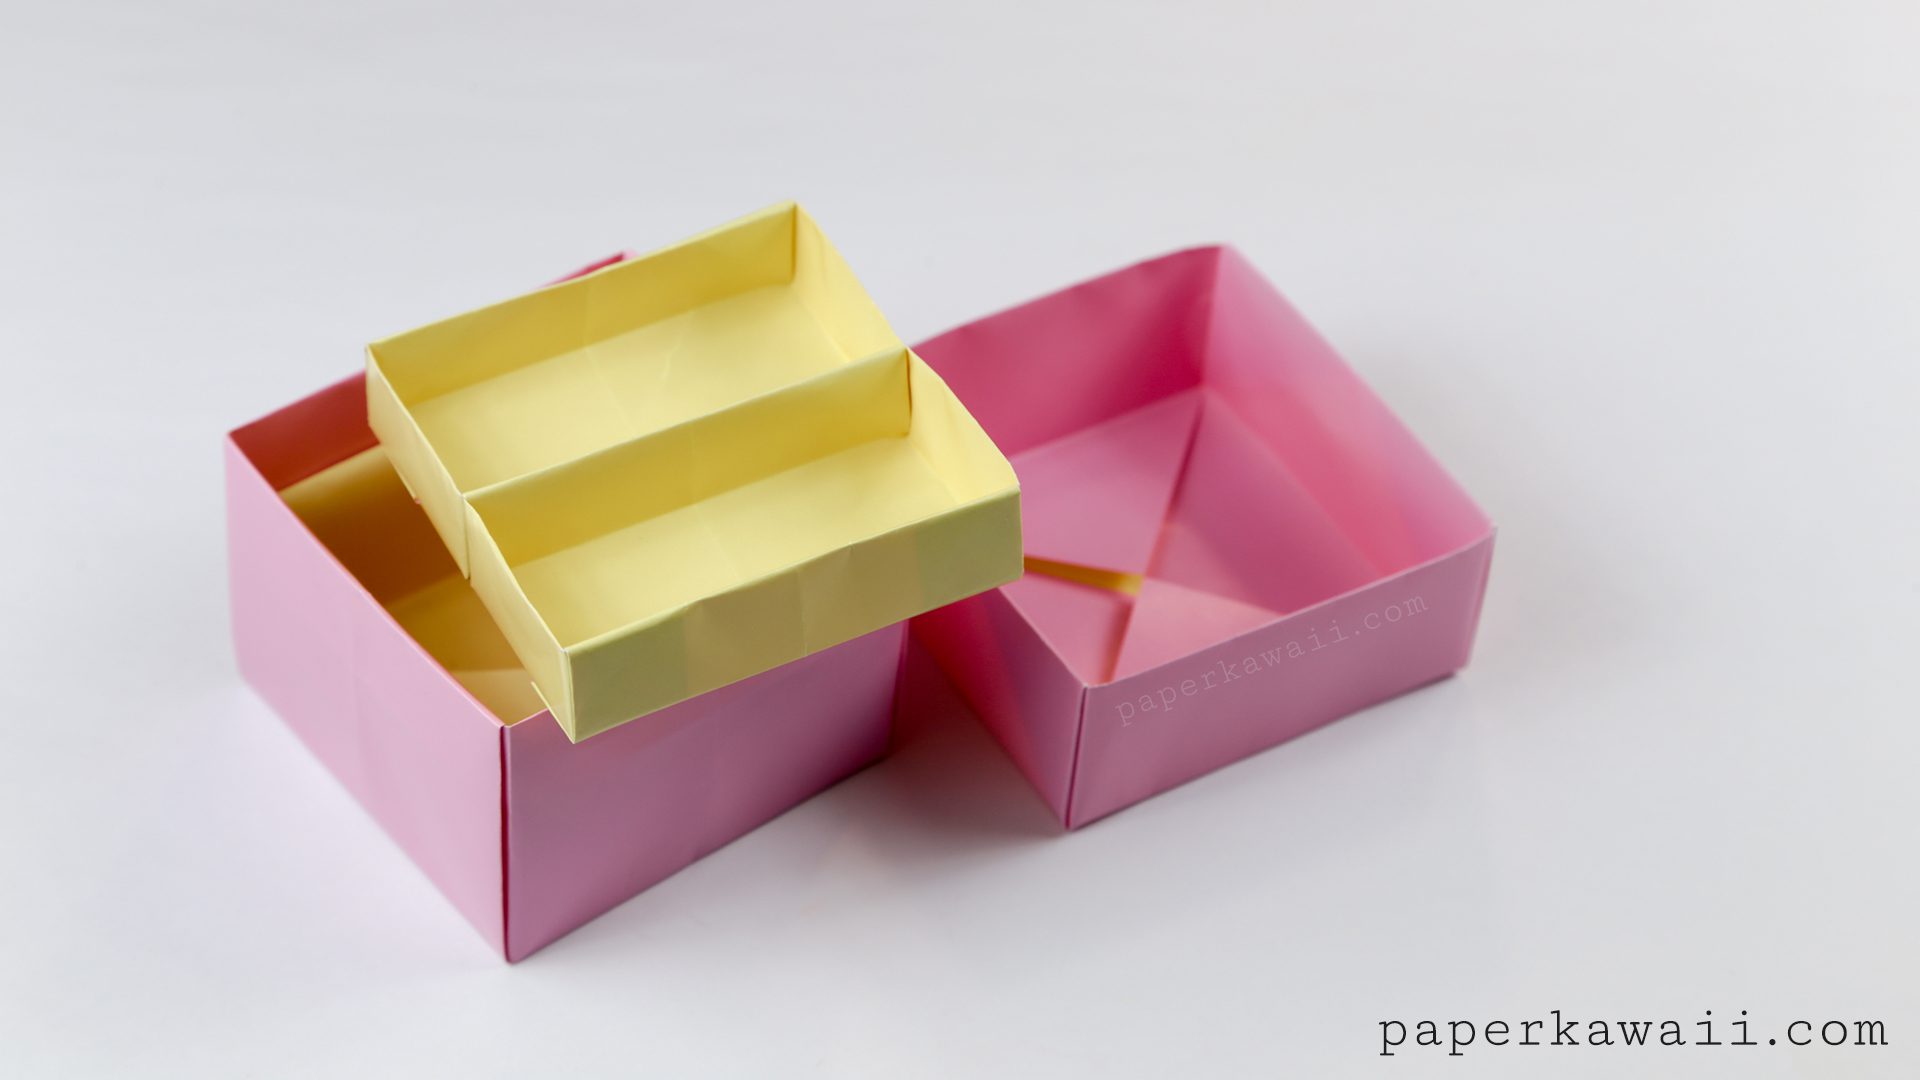 Origami 2 Tier Box Tutorial - Toolbox with Lift-out Tray - Pink and Yellow